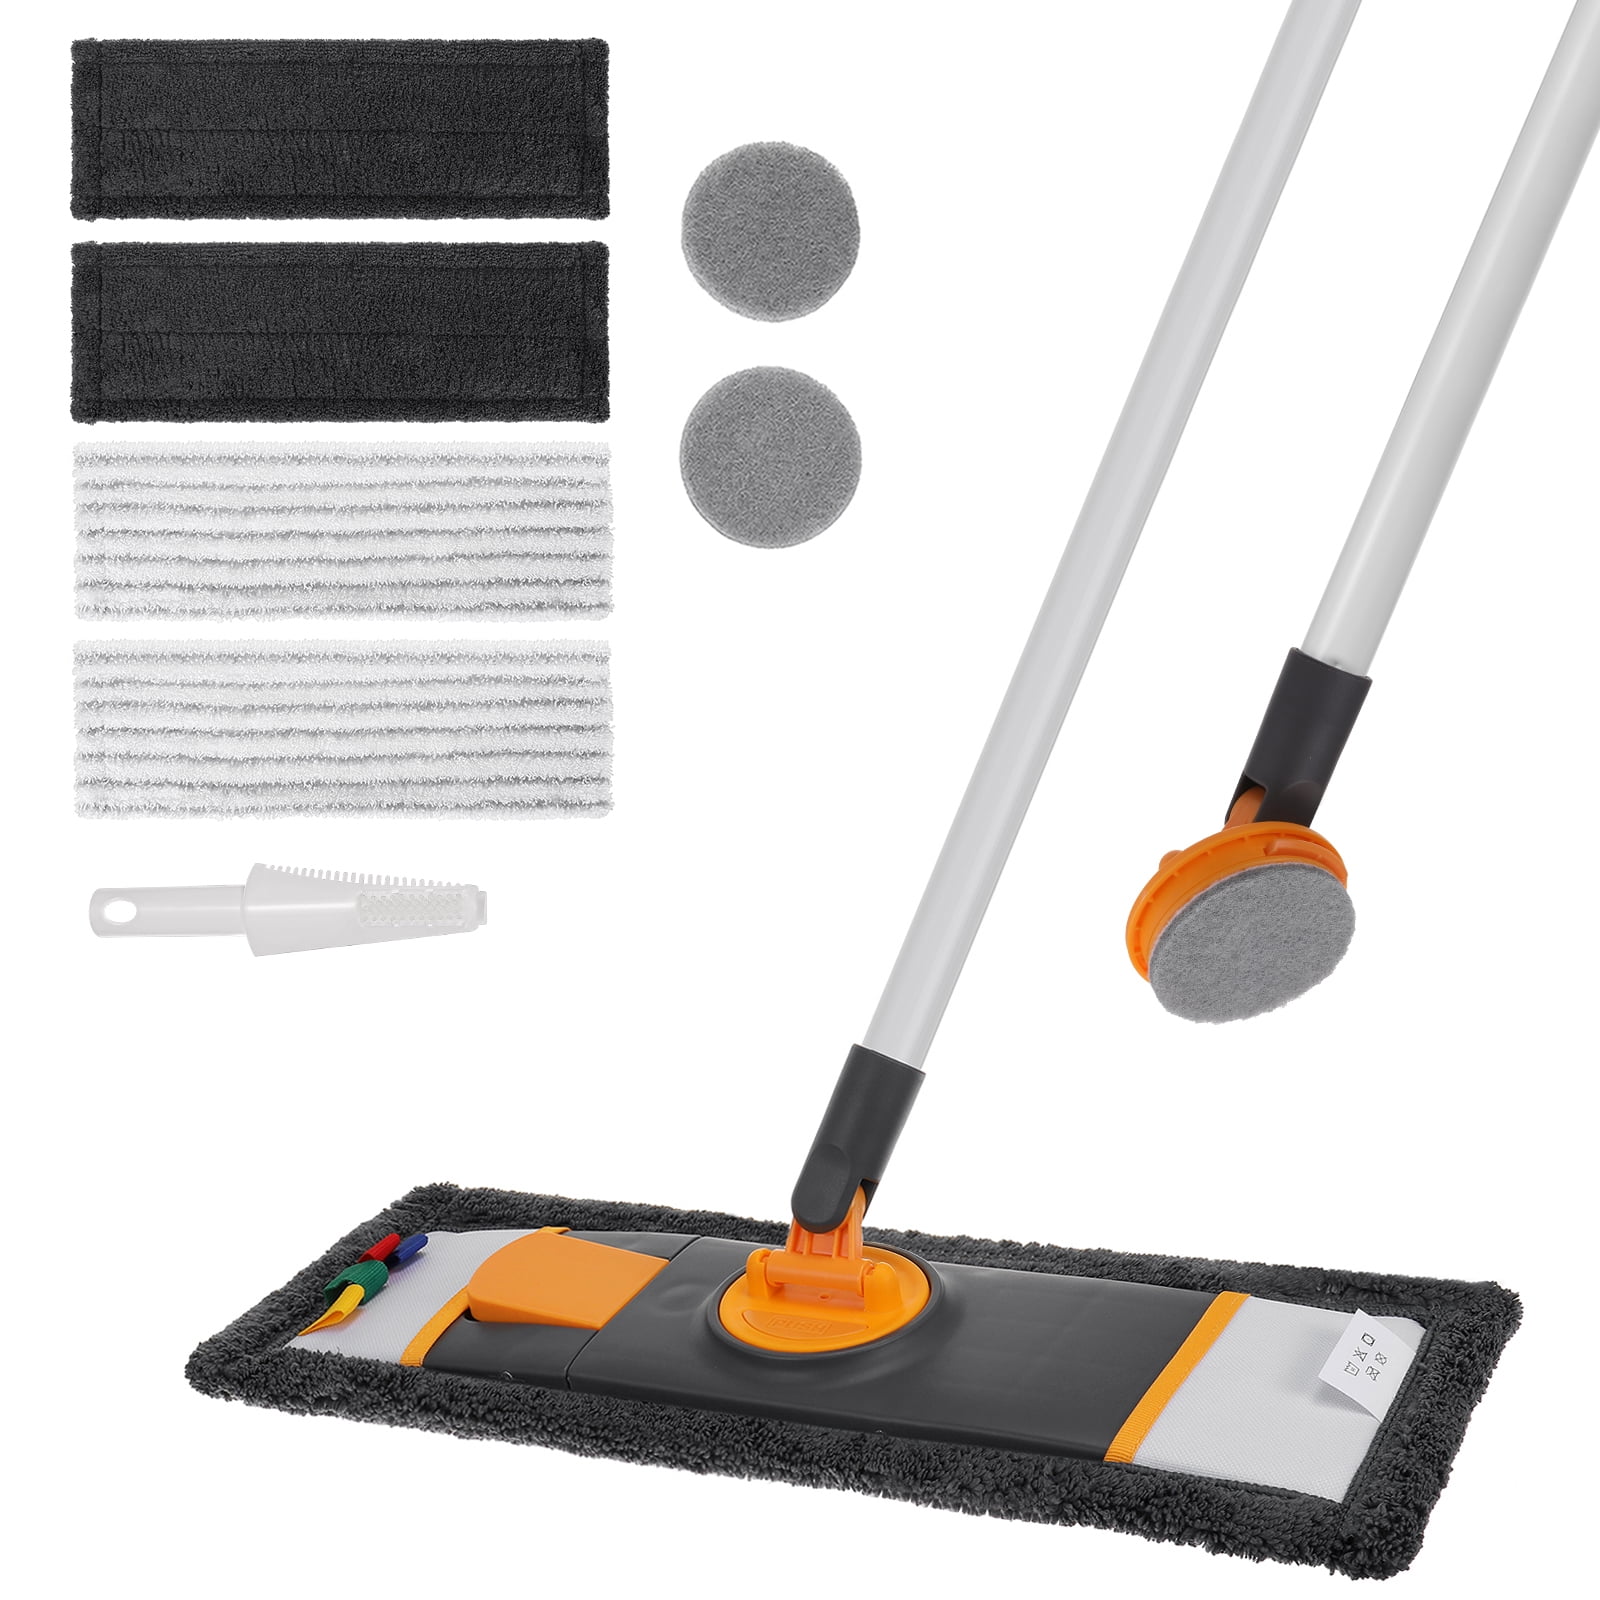 18 Professional Microfiber Mop Floor Cleaning System, Flat Mop with  Stainless Steel Handle, 4 Reusable Washable Mop Pads, Wet and Dust Mopping  for